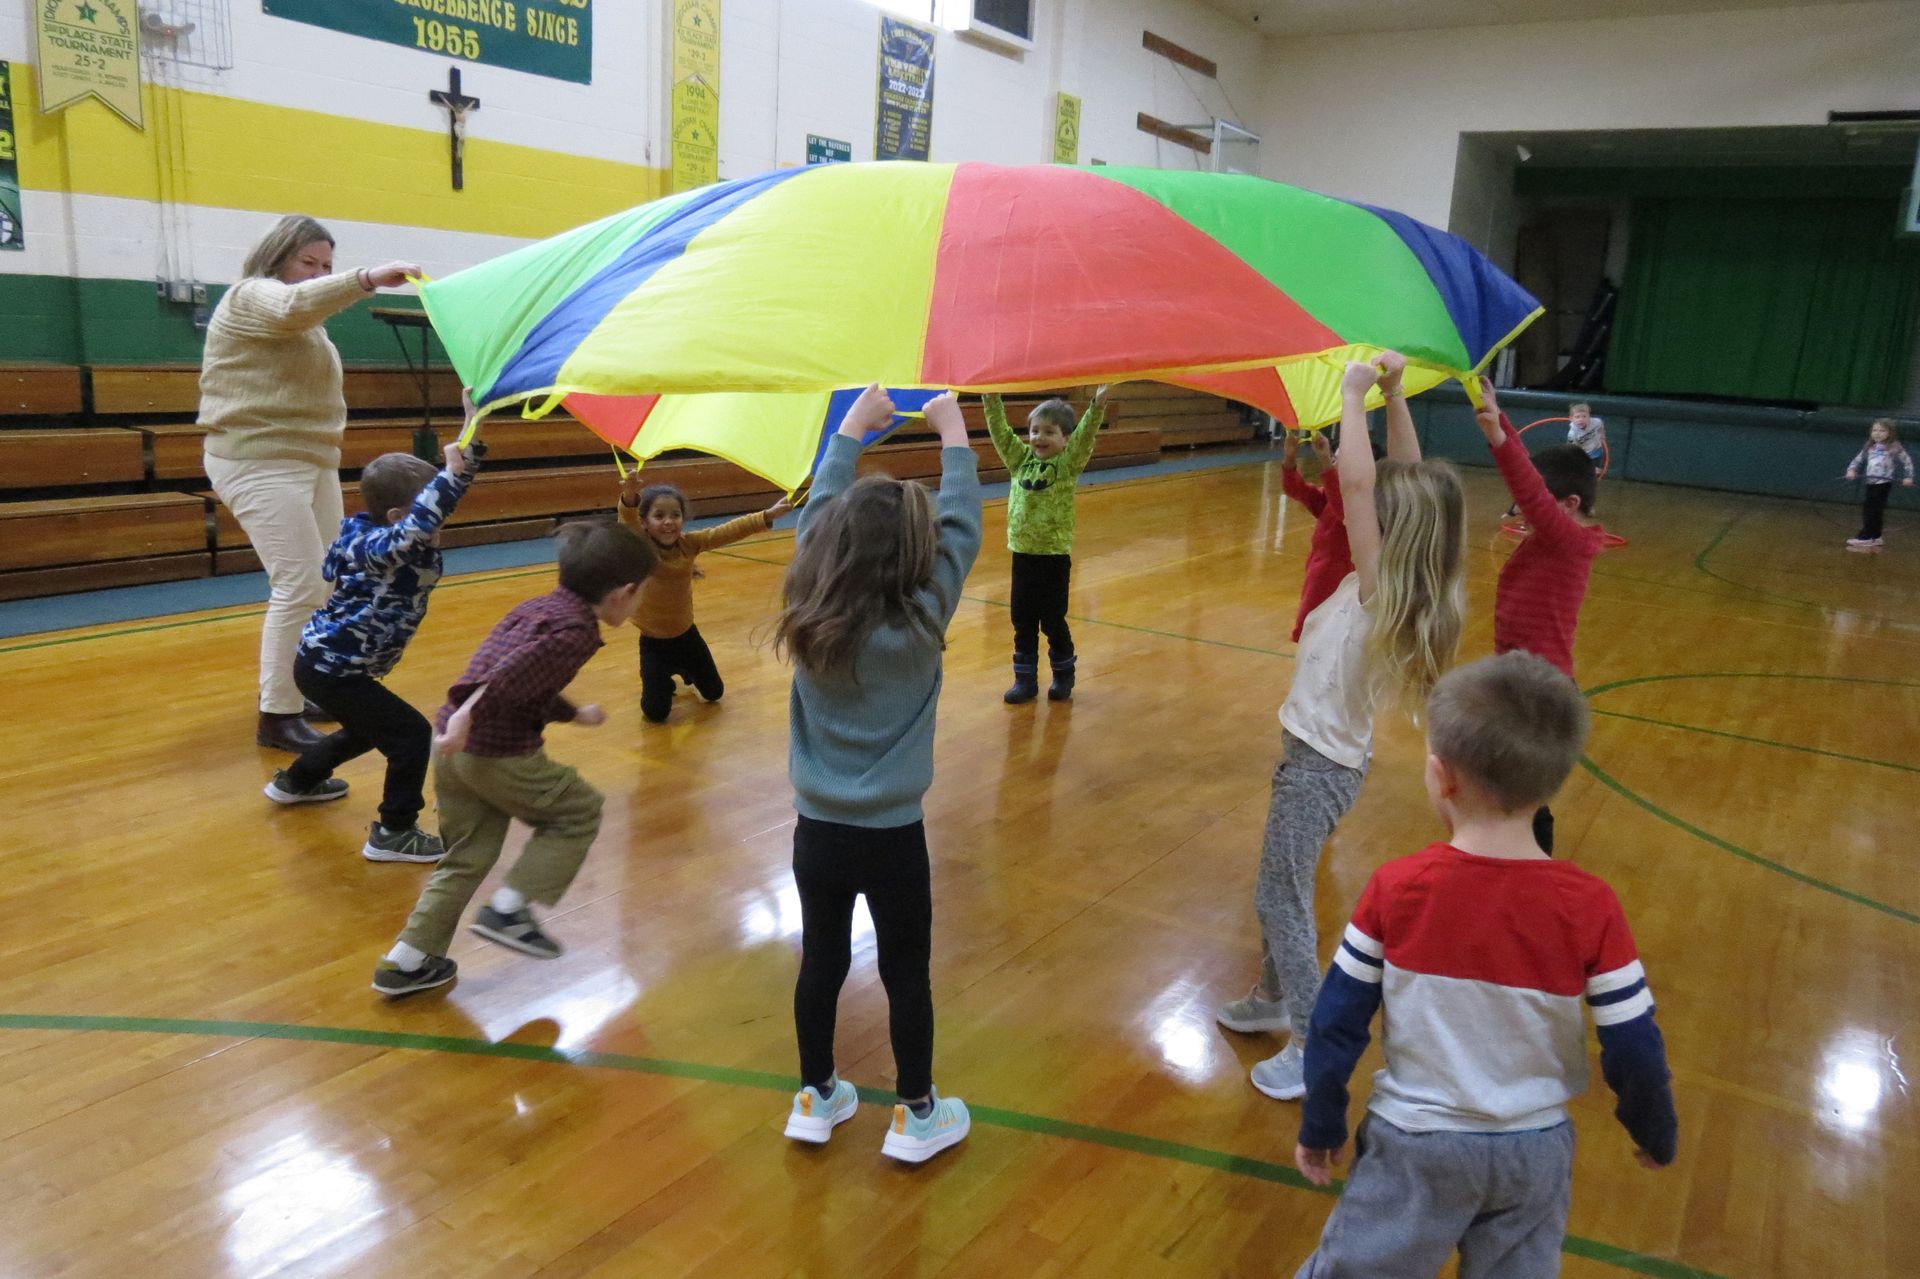 A group of children are playing with a colorful parachute in a gym